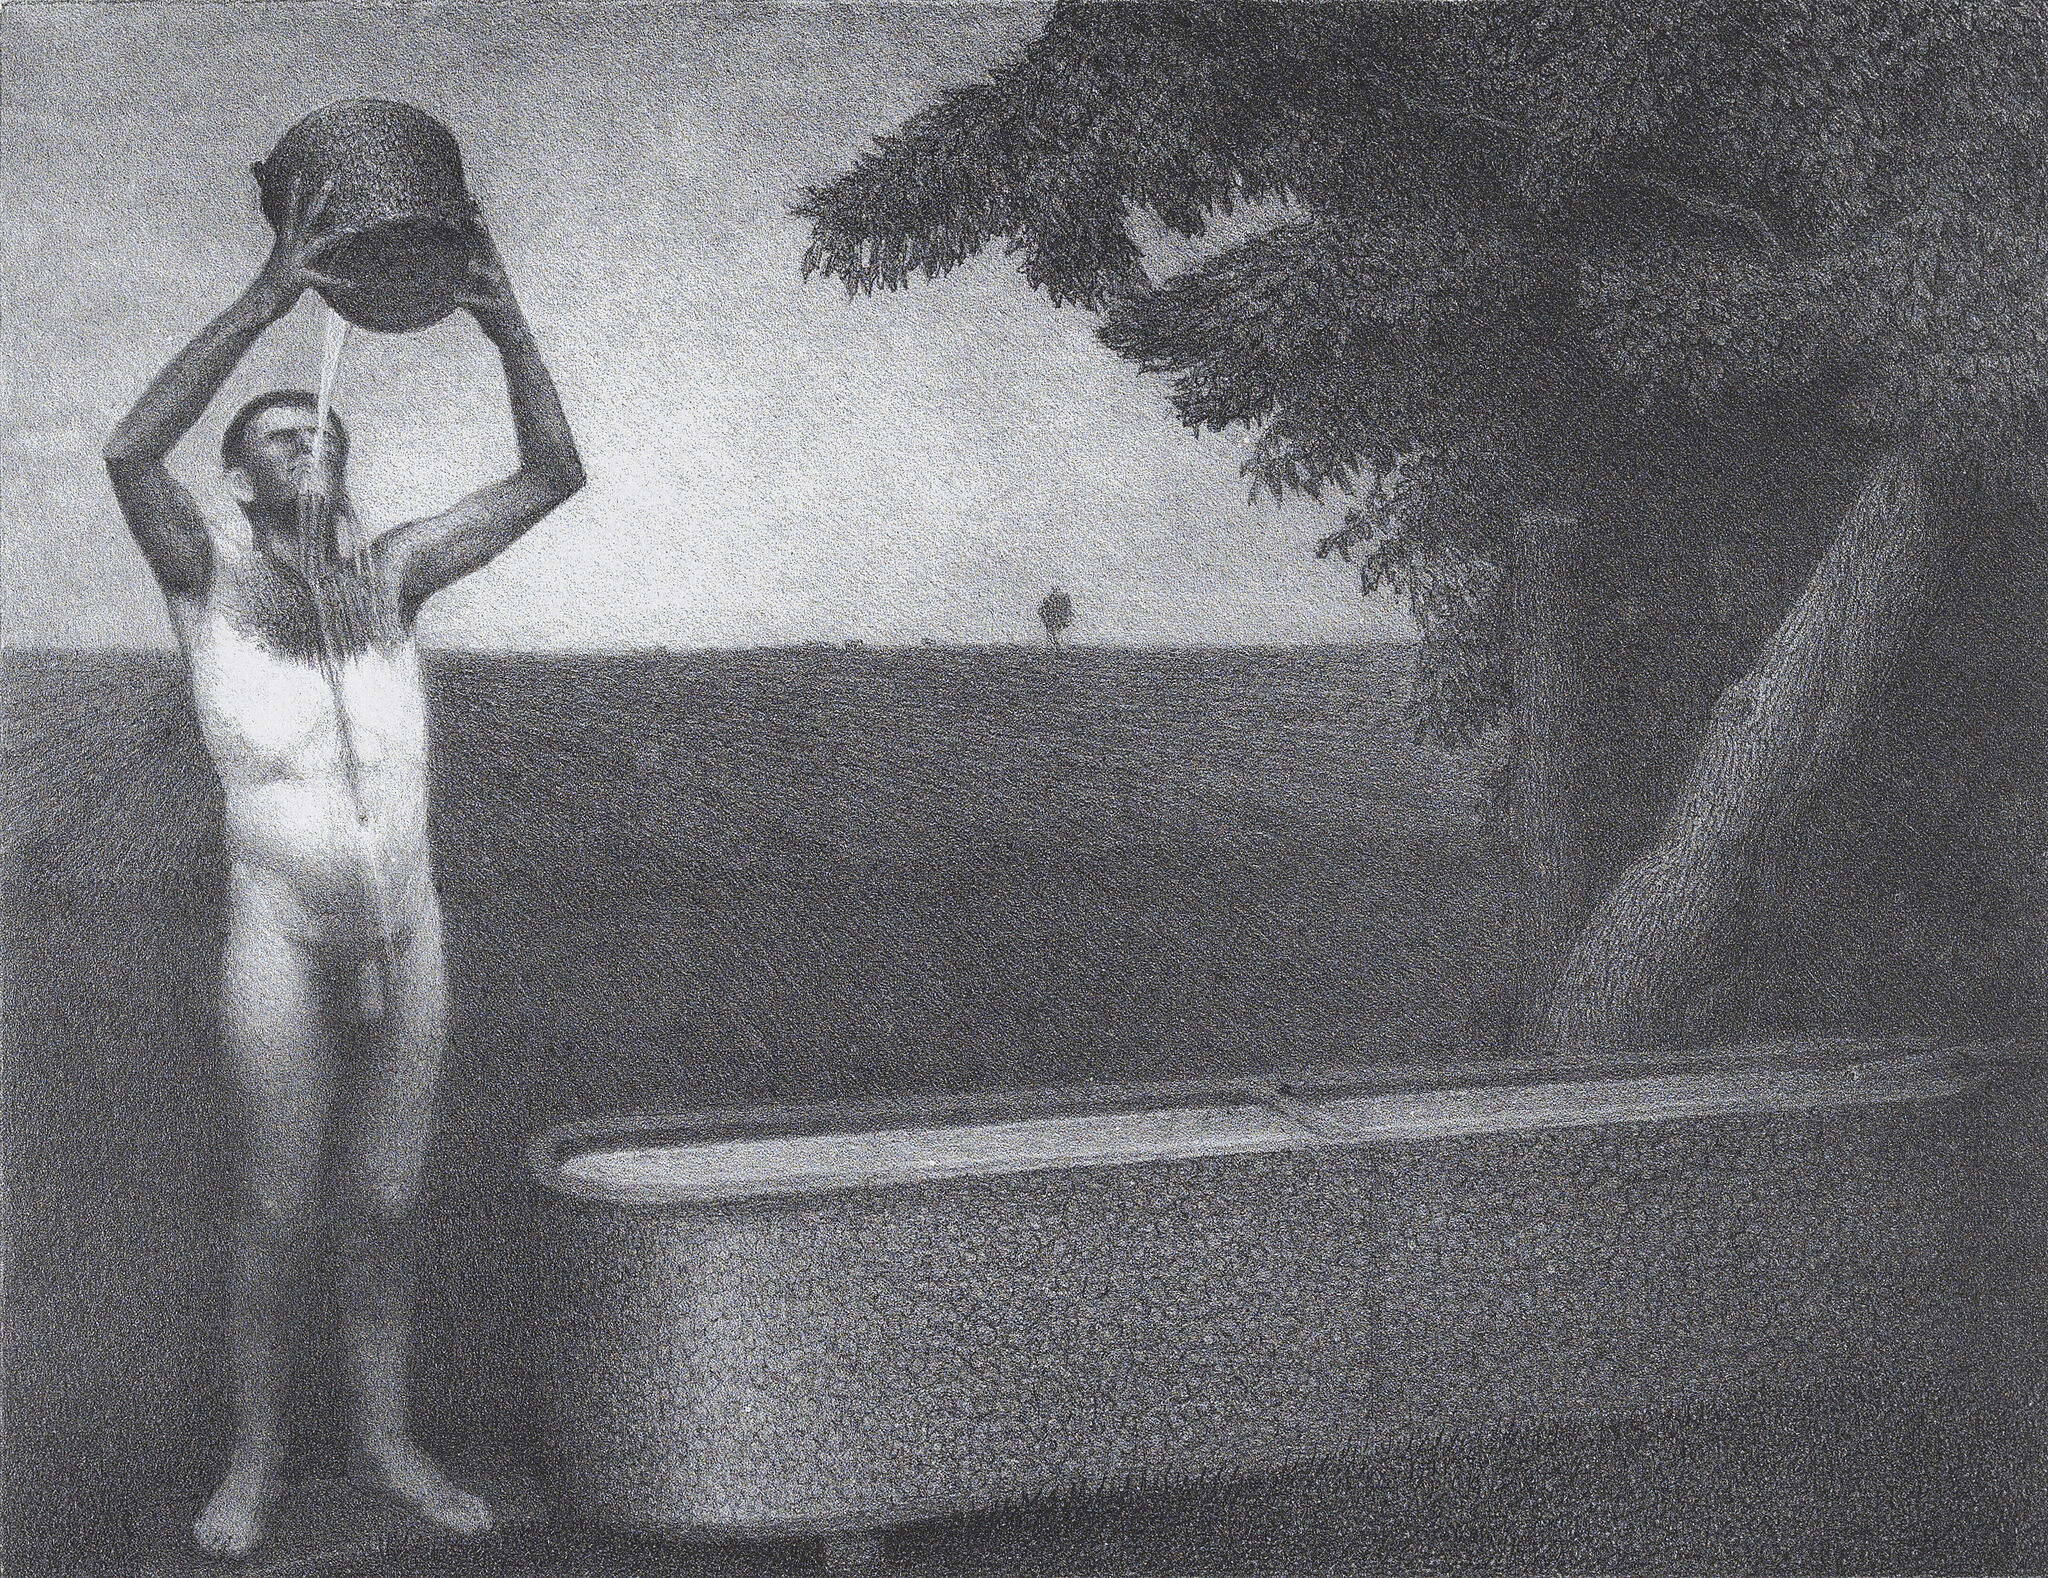 Print of man bathing nude outdoors with bucket.